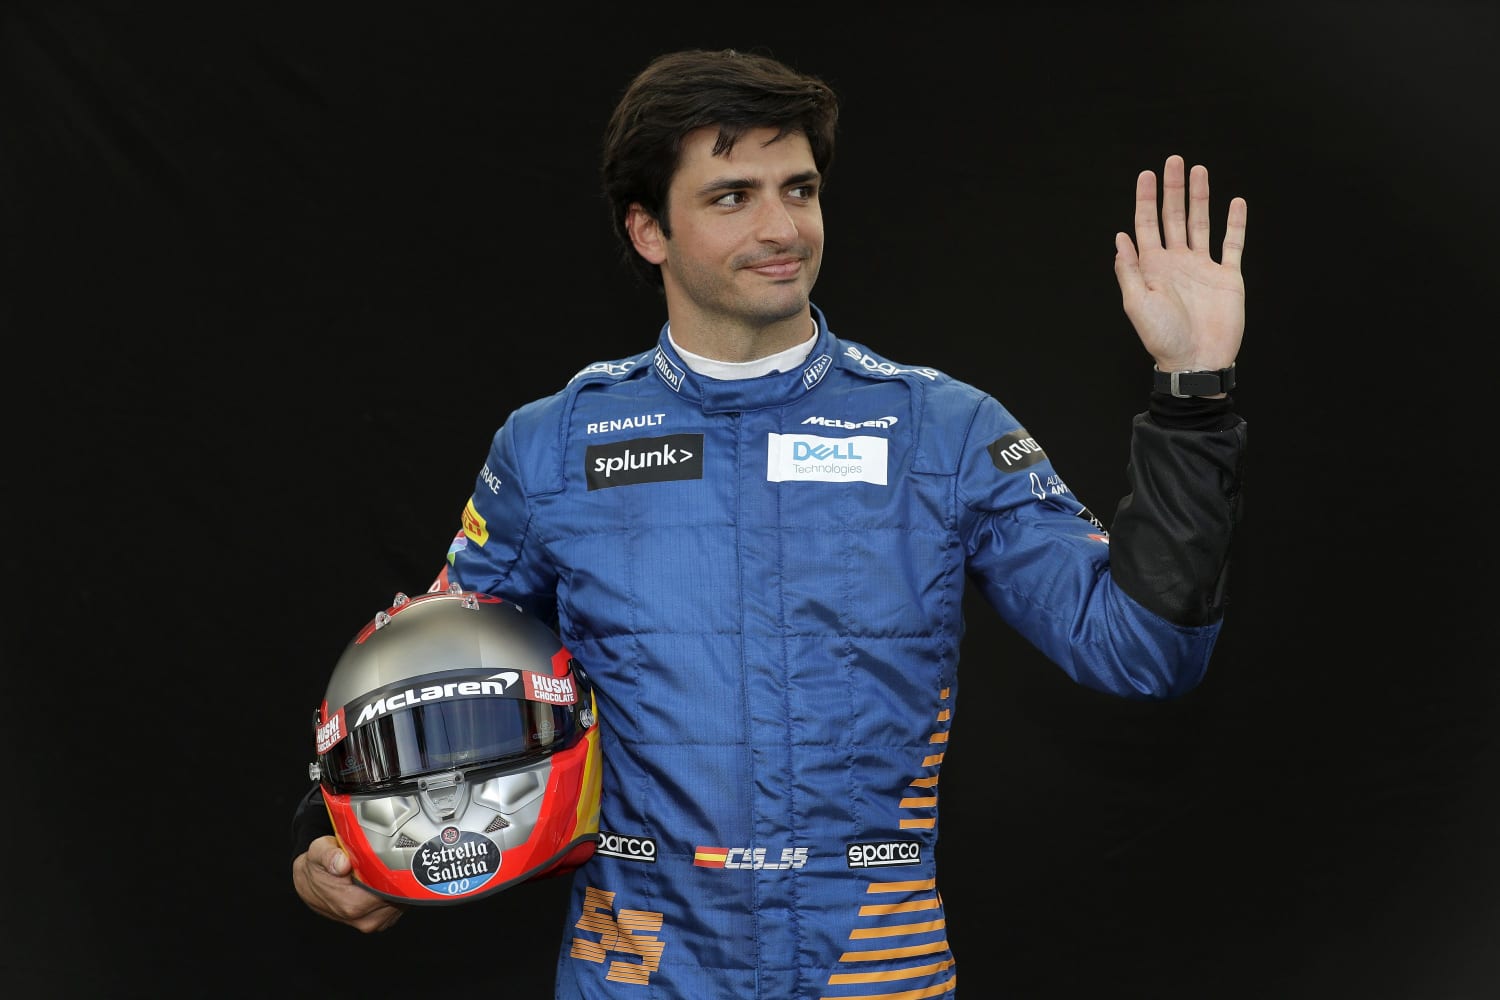 Joining Ferrari comes with added pressure for Sainz Jr.